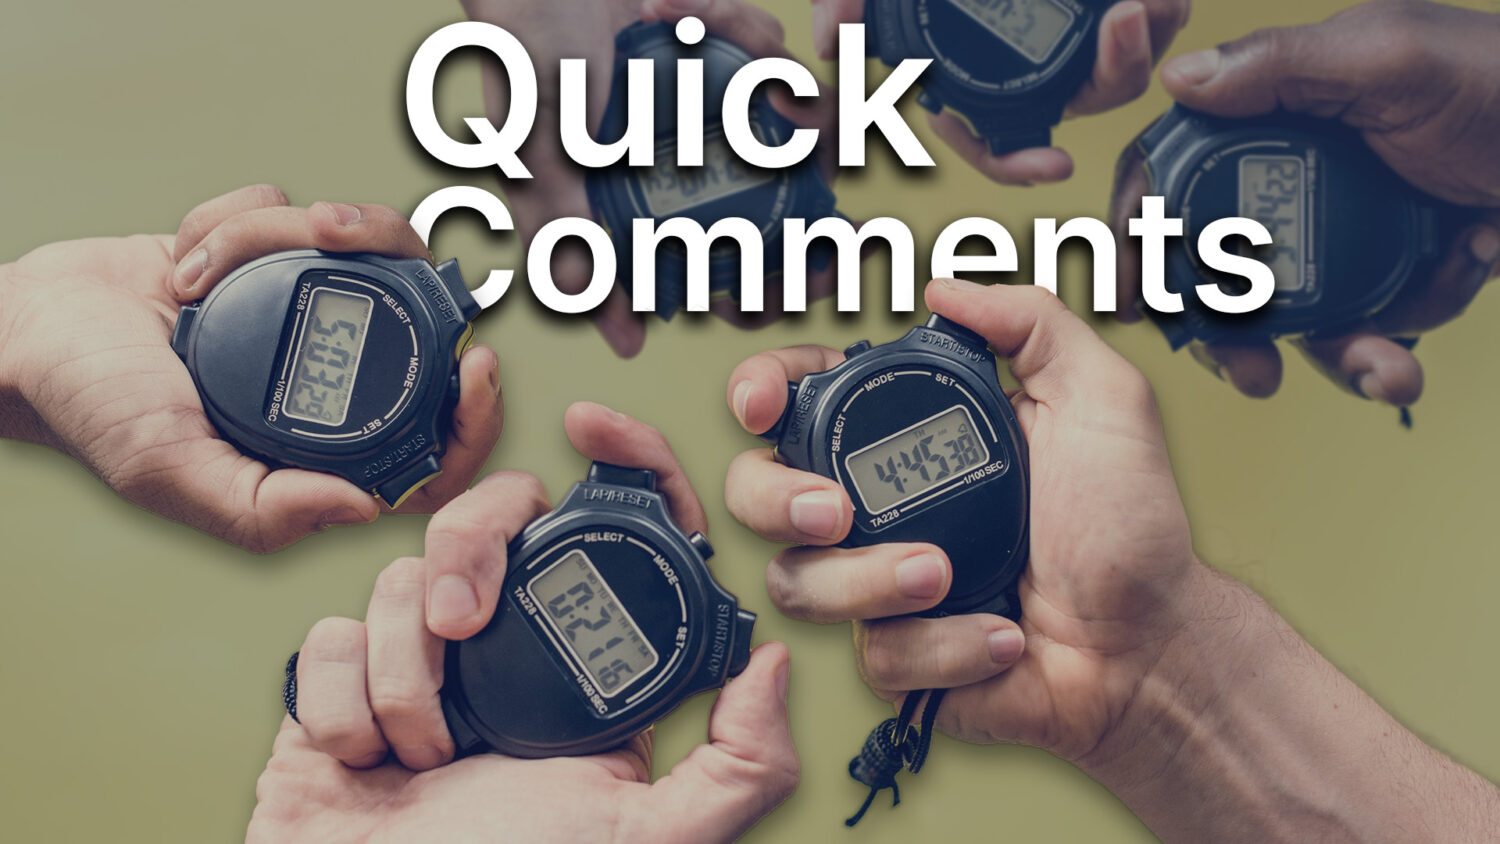 How To Add Comments Quick itris 9 Recruitment CRM Showcase